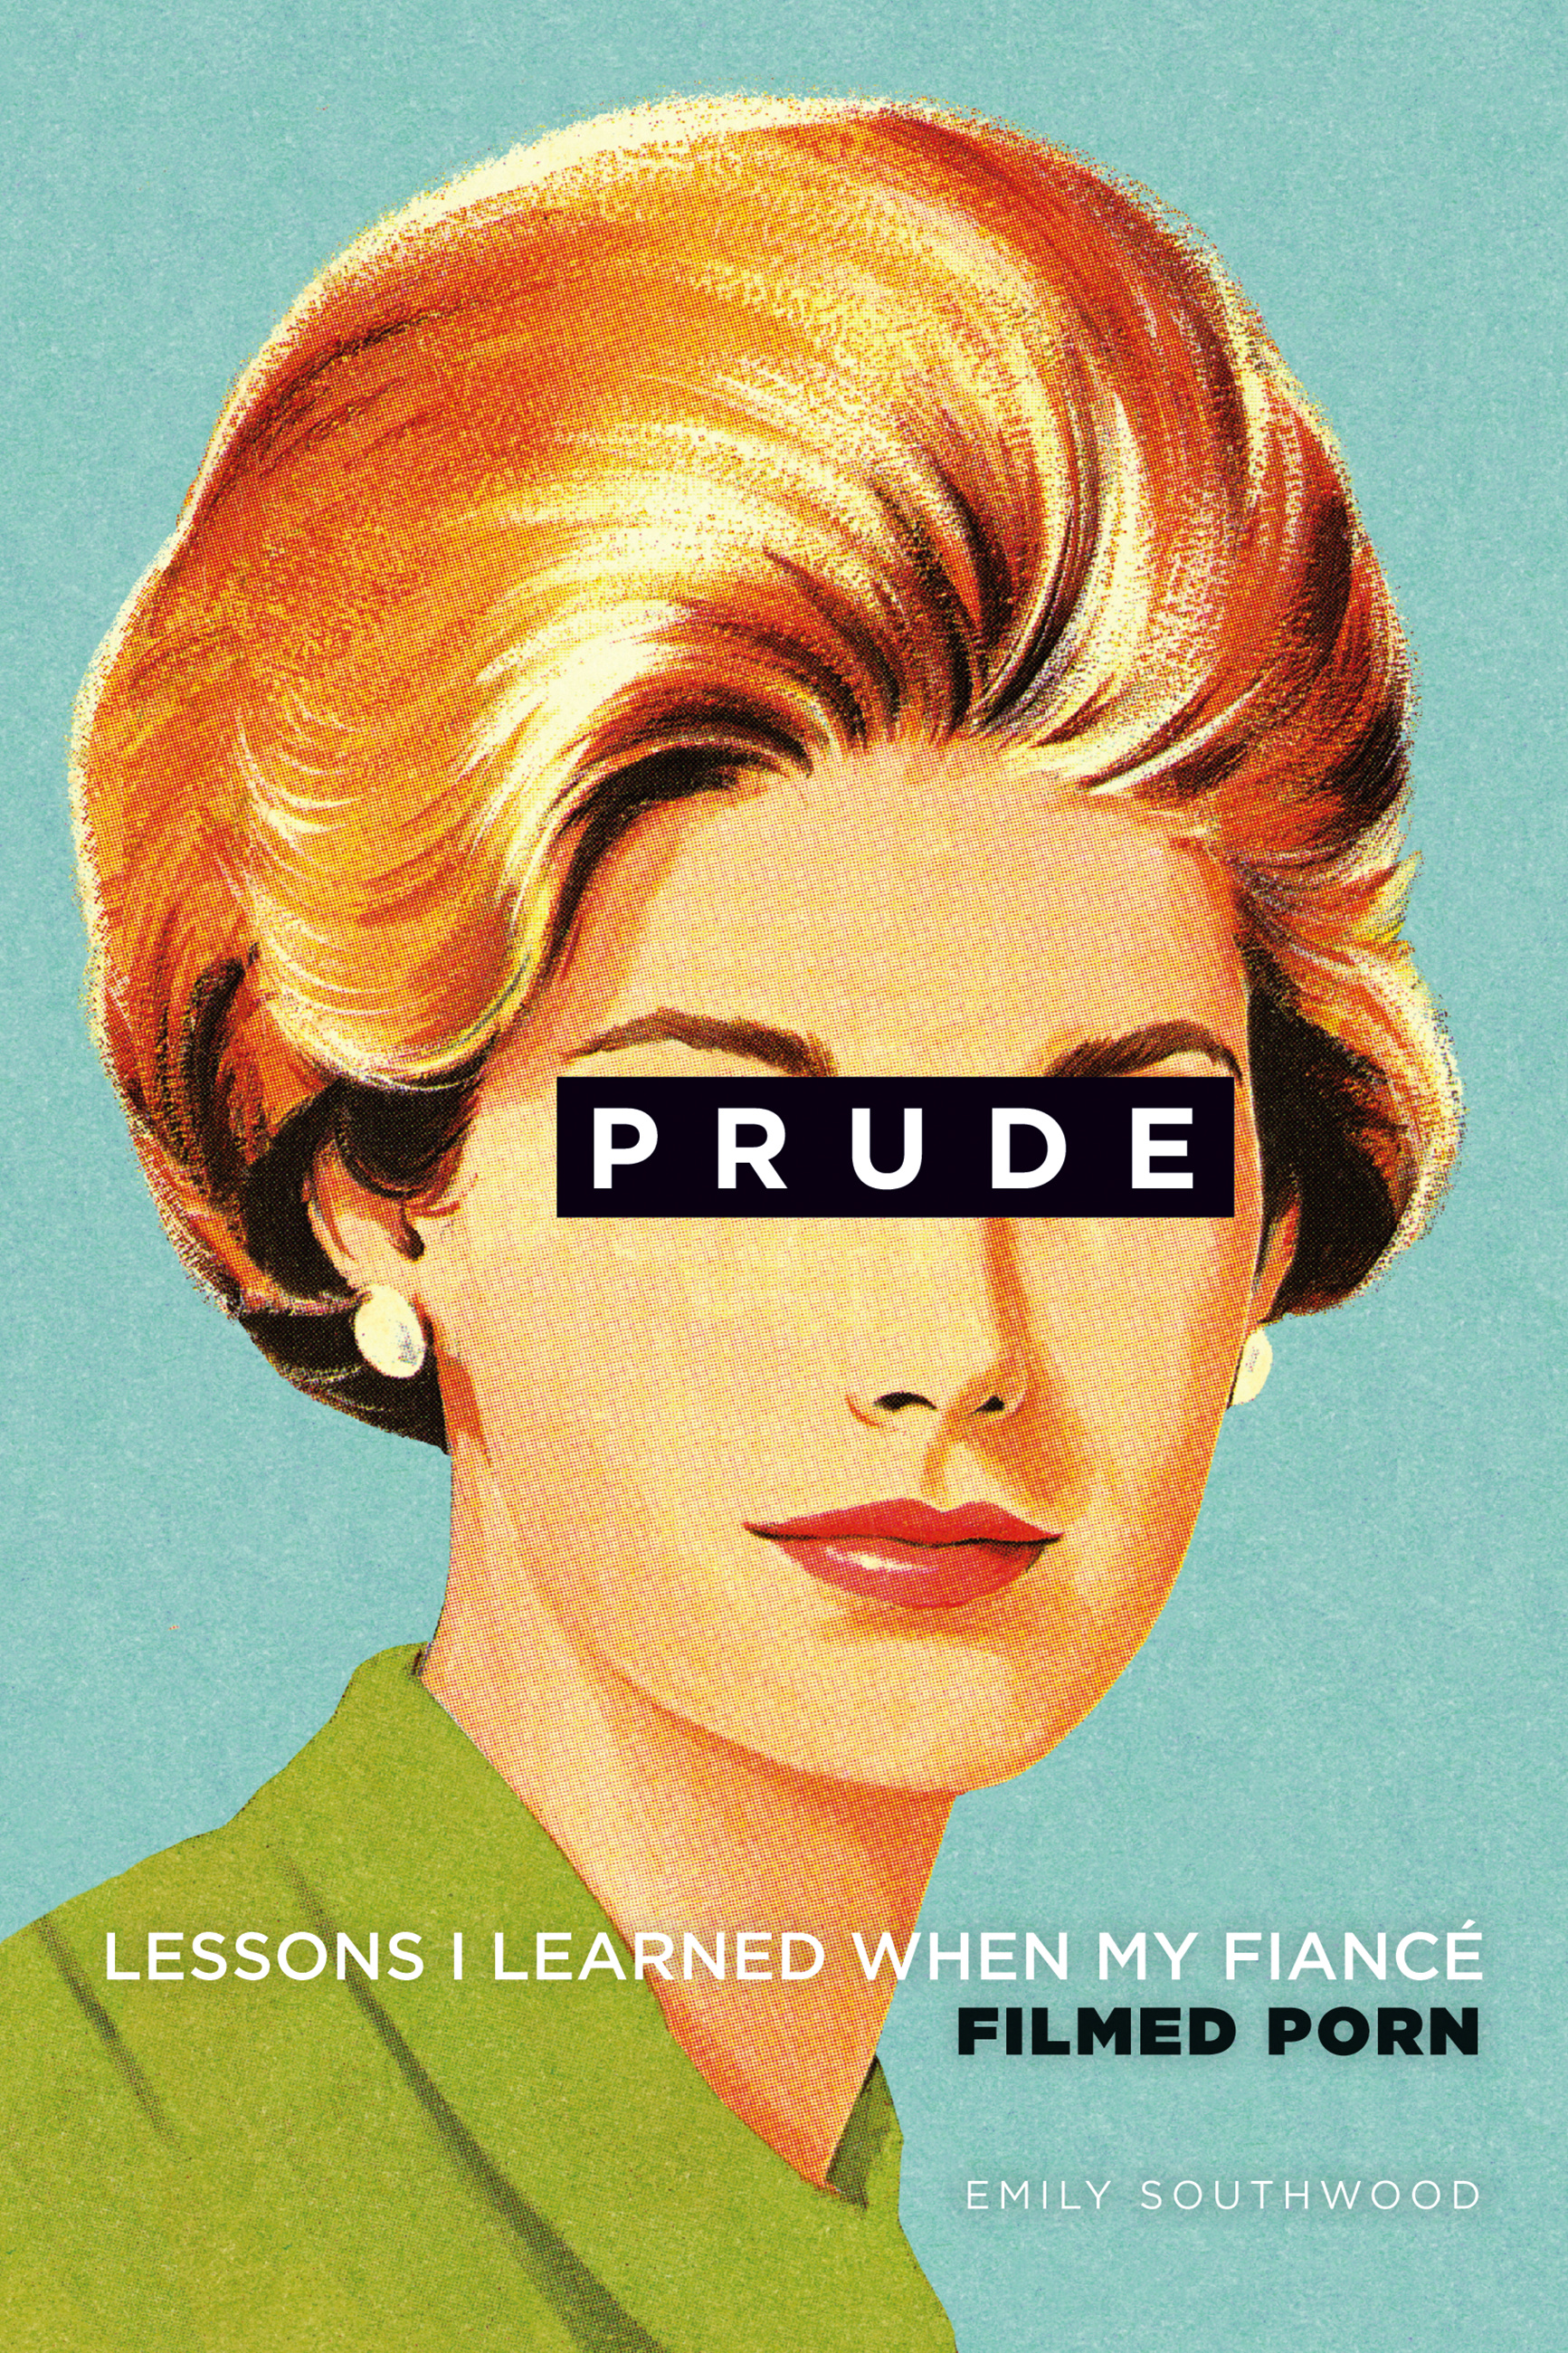 Prude by Emily Southwood Hachette Book Group pic